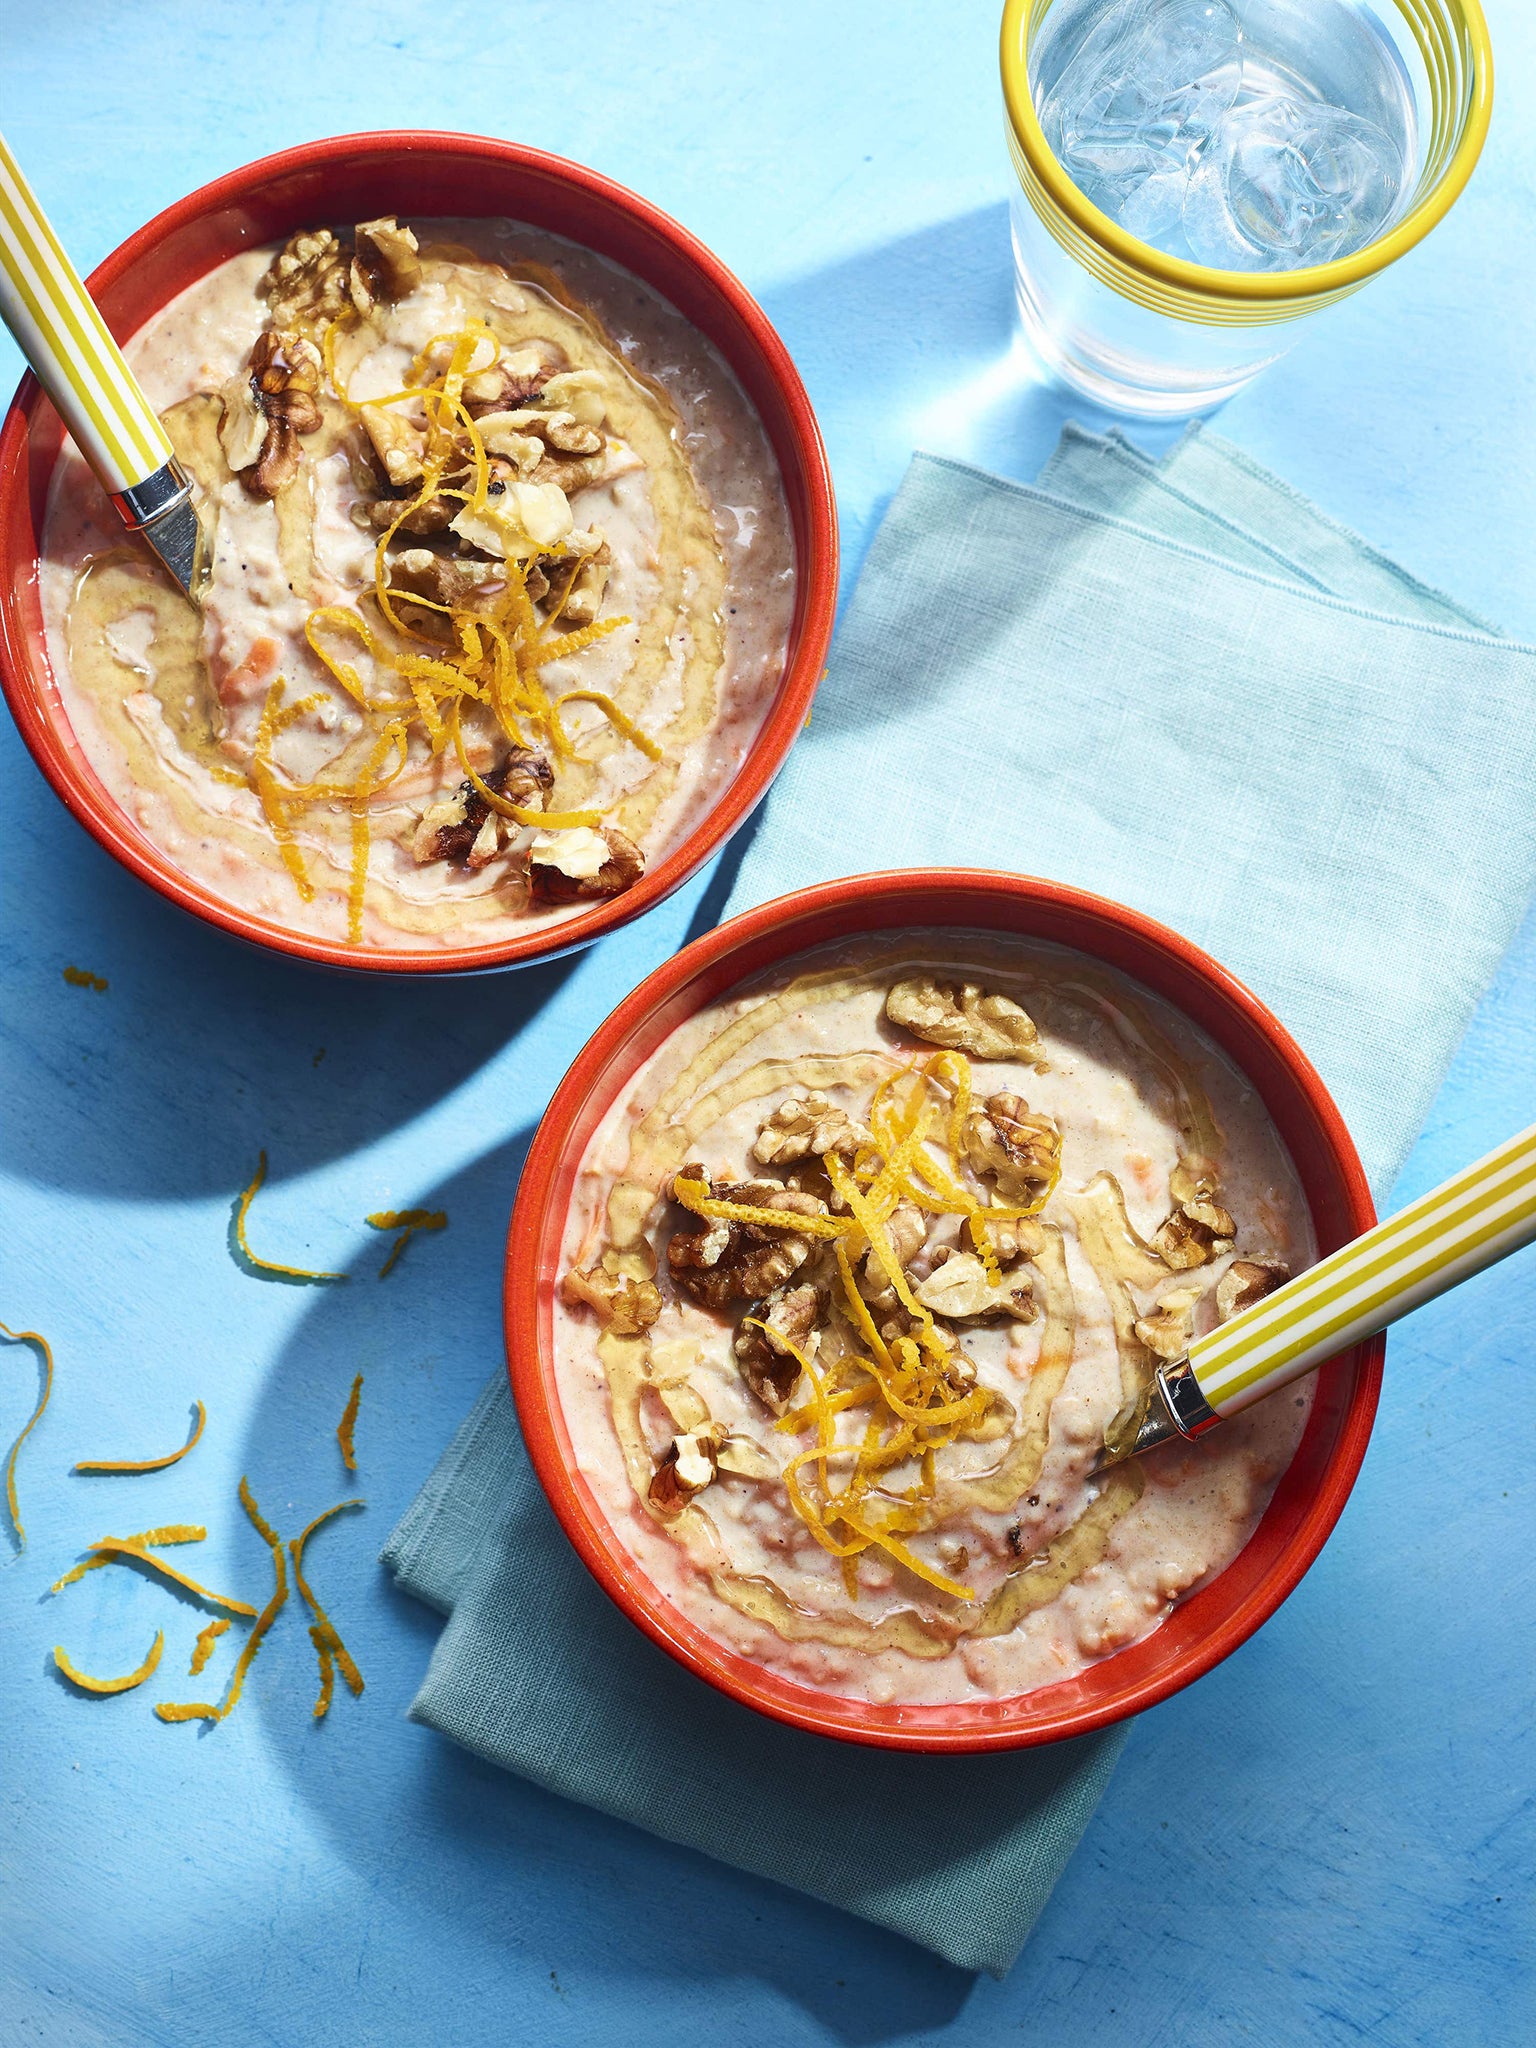 Overnight oats are a great way to get ahead for the next day